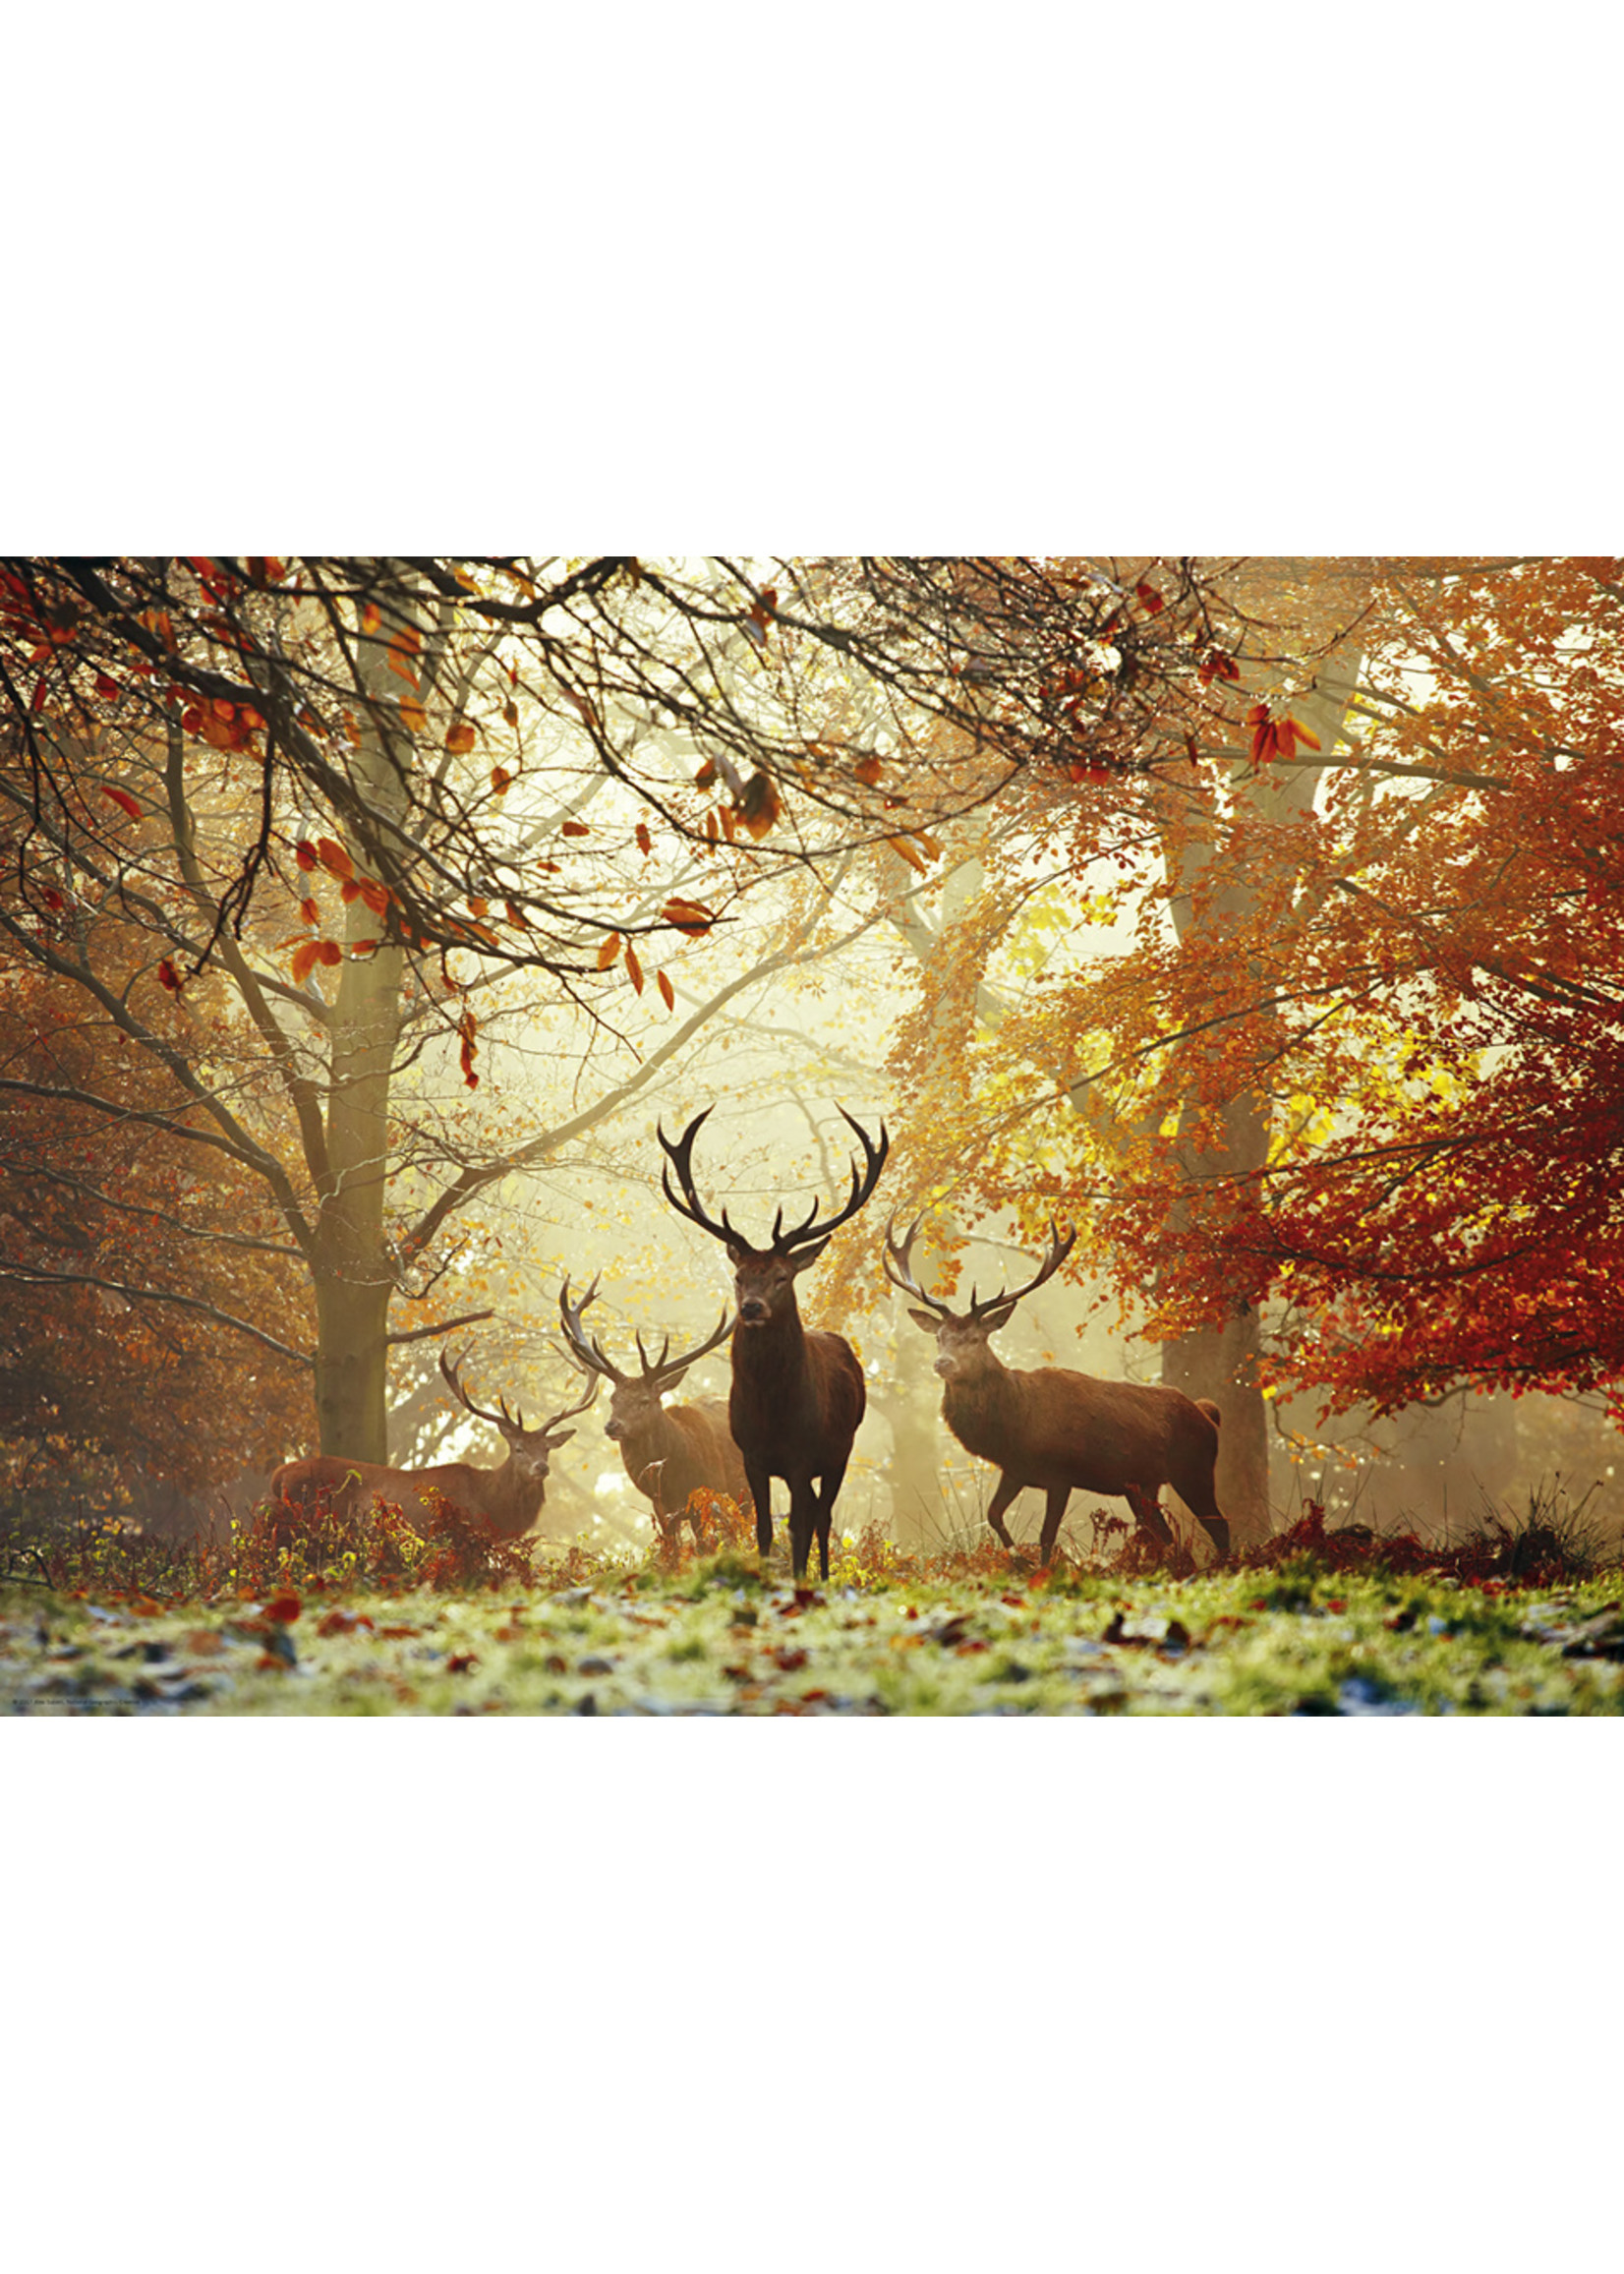 Heye Stags - 1000 Piece Puzzle